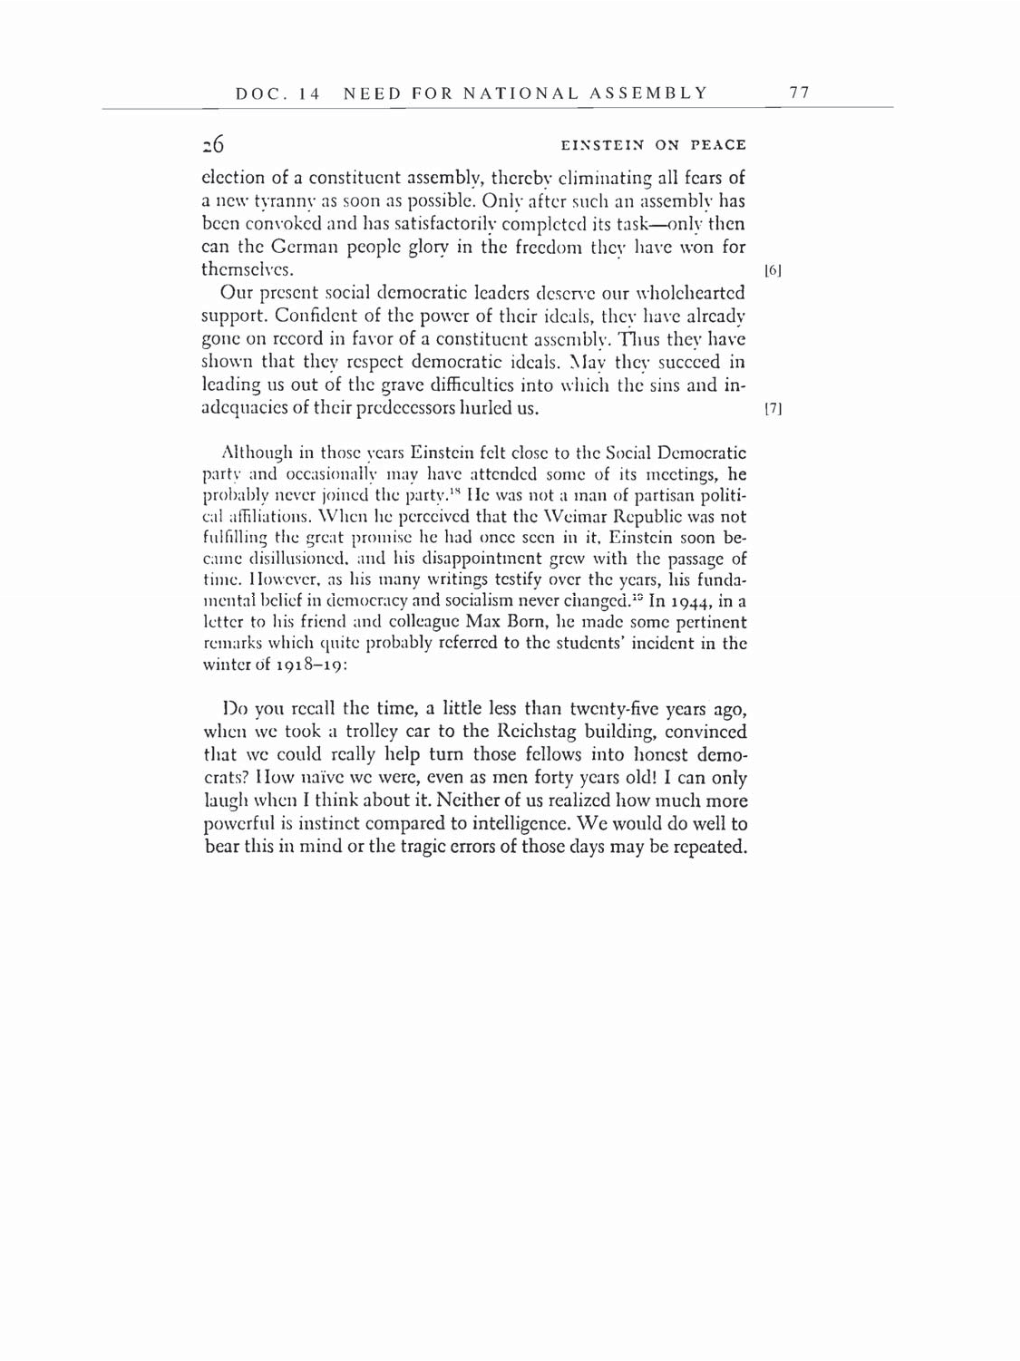 Volume 7: The Berlin Years: Writings, 1918-1921 (English translation supplement) page 77